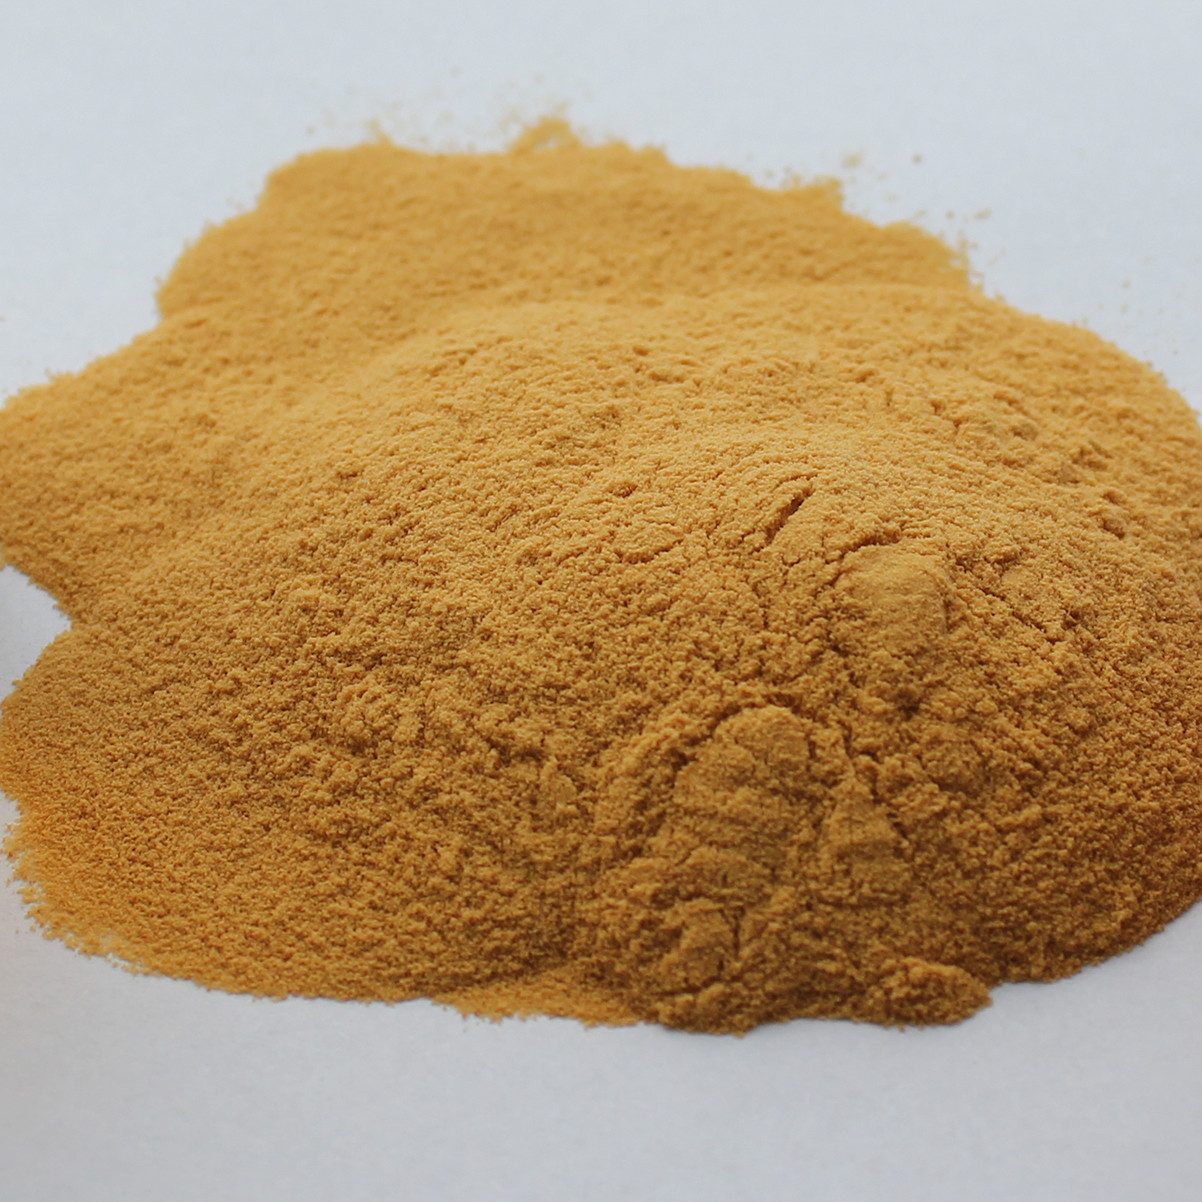  HVP Hydrolyzed Vegetable Powder Soy Protein E211 Food Additive Manufactures